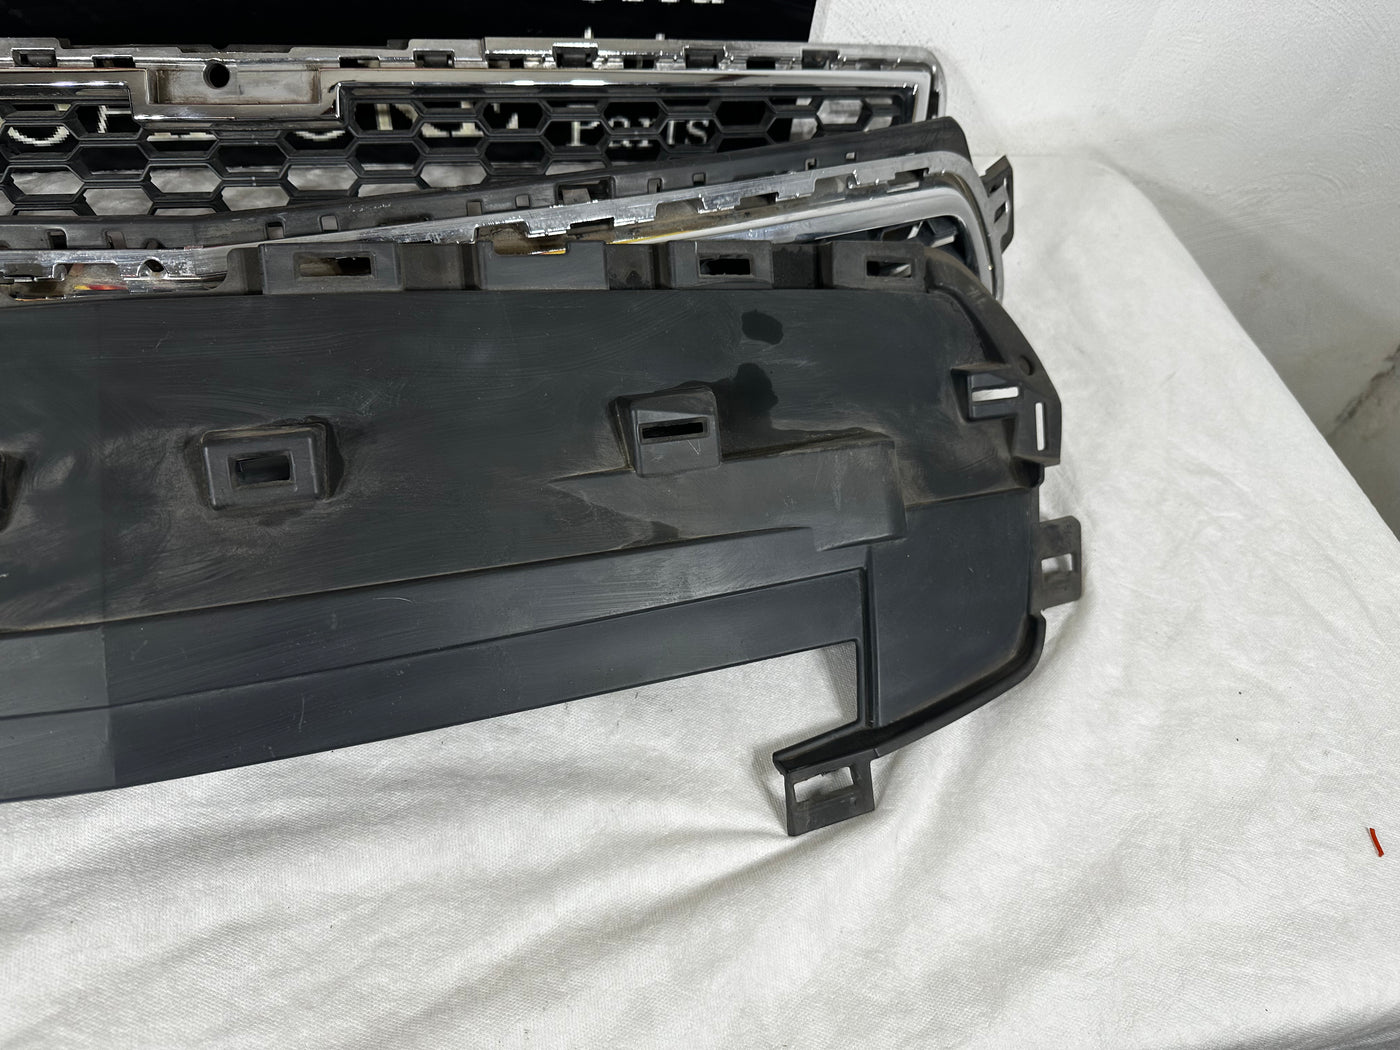 2013 CHEVY MALIBU FRONT UPPER GRILL TOP & Bottom Whole Set OEM